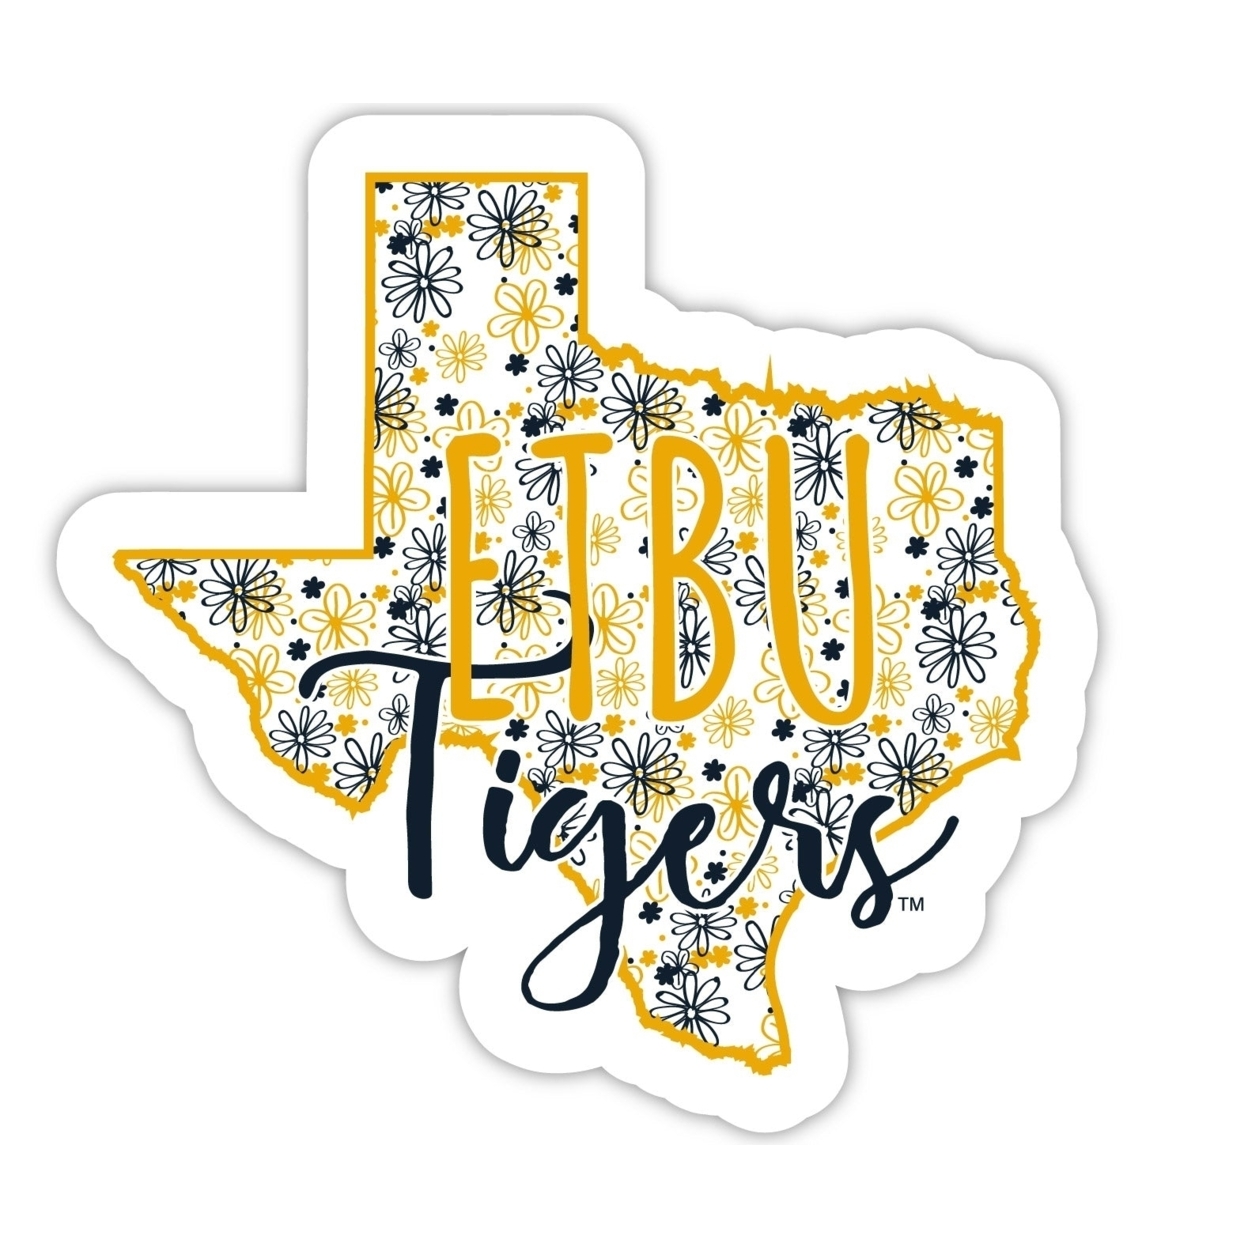 East Texas Baptist University Floral State Die Cut Decal 4-Inch